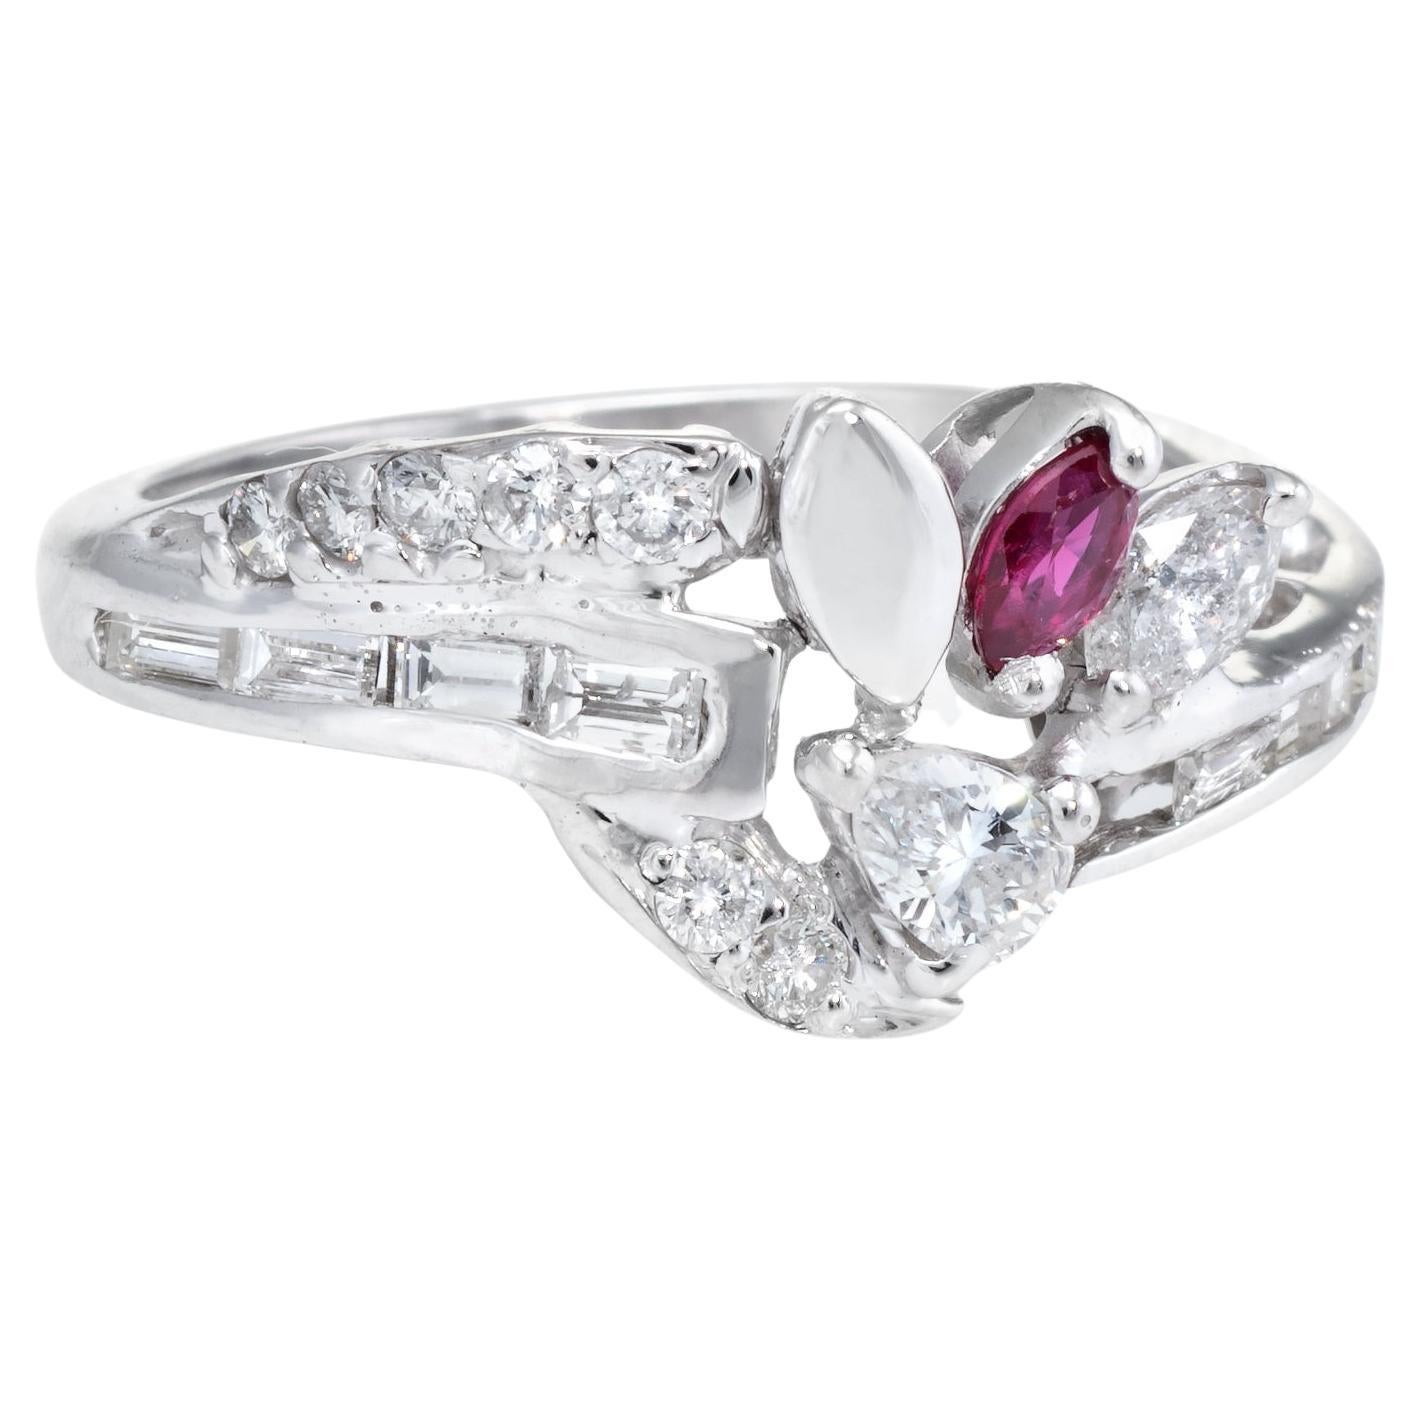 Mixed Cut Diamond Ruby Band Vintage Ring 14k White Gold Estate Fine Jewelry